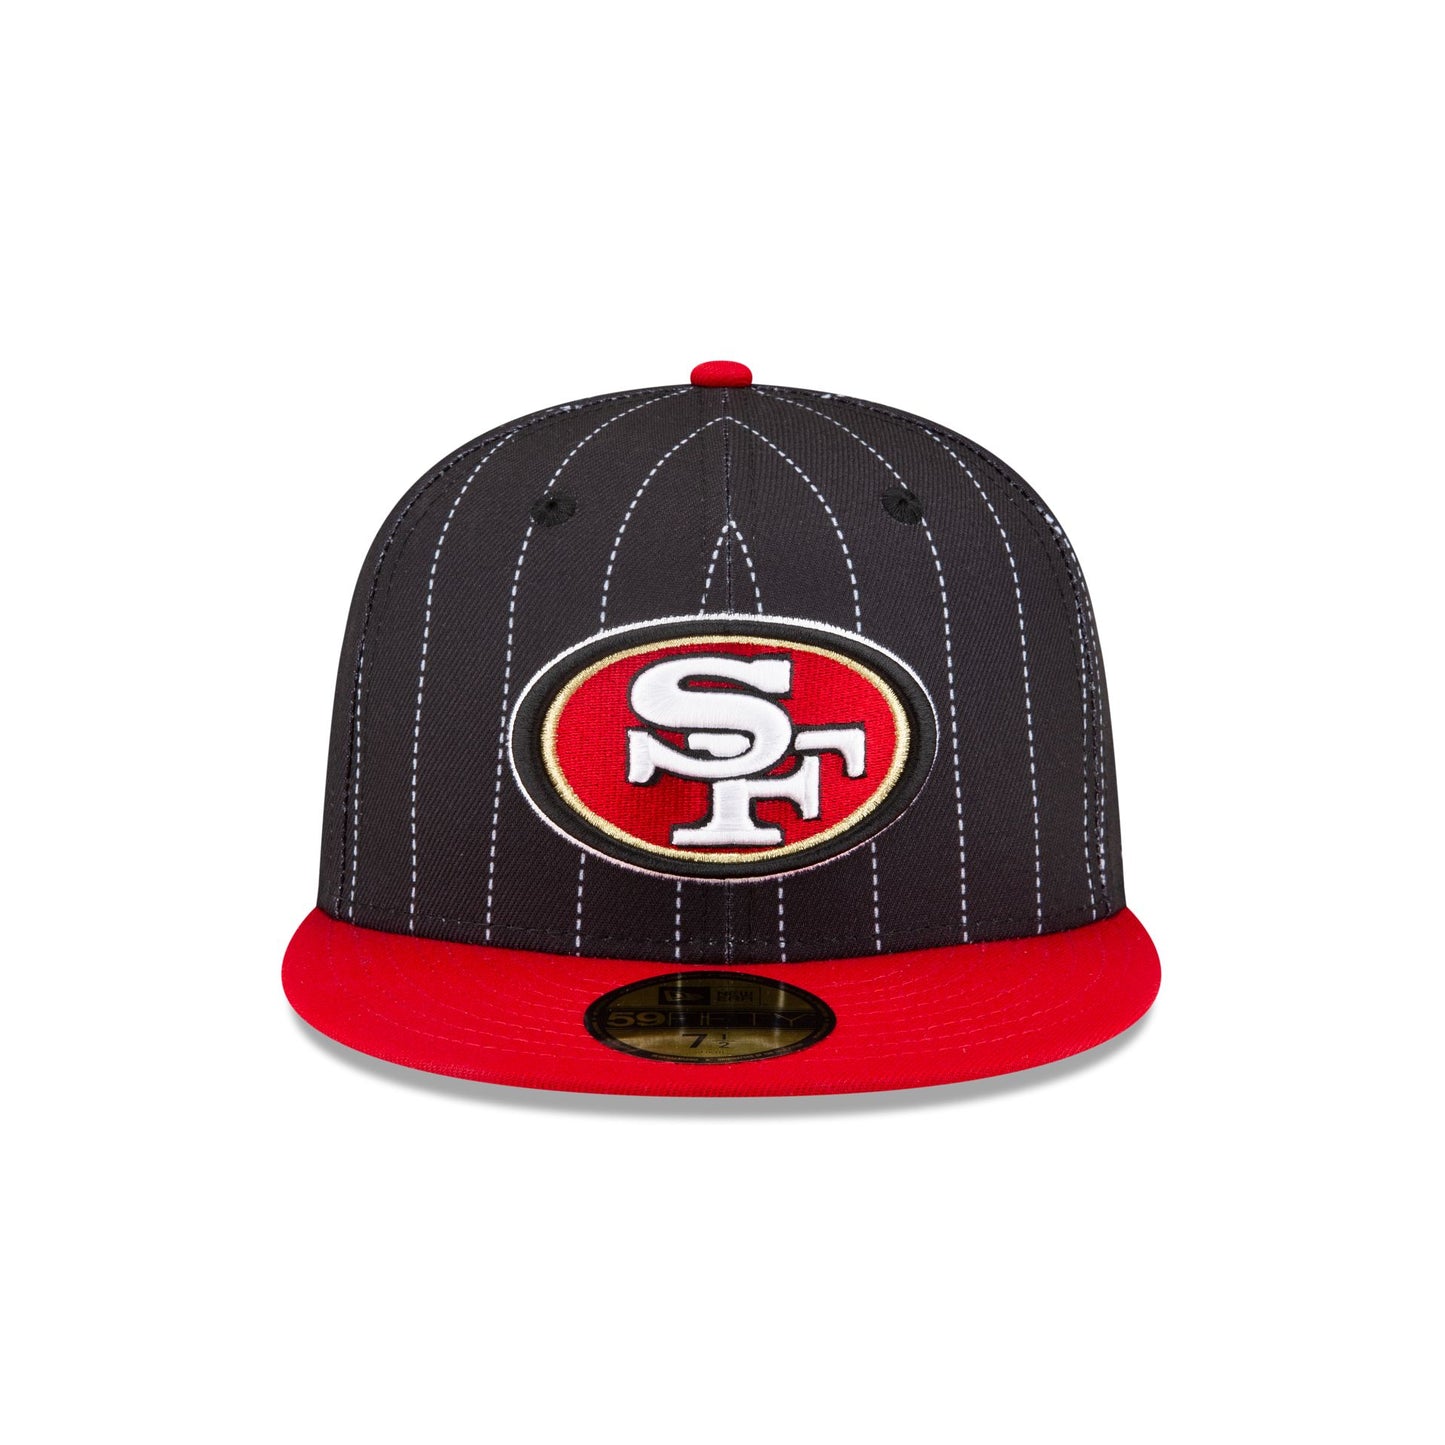 Just Caps Pinstripe San Francisco 49ers 59FIFTY Fitted Hat, Black - Size: 7 1/8, NFL by New Era